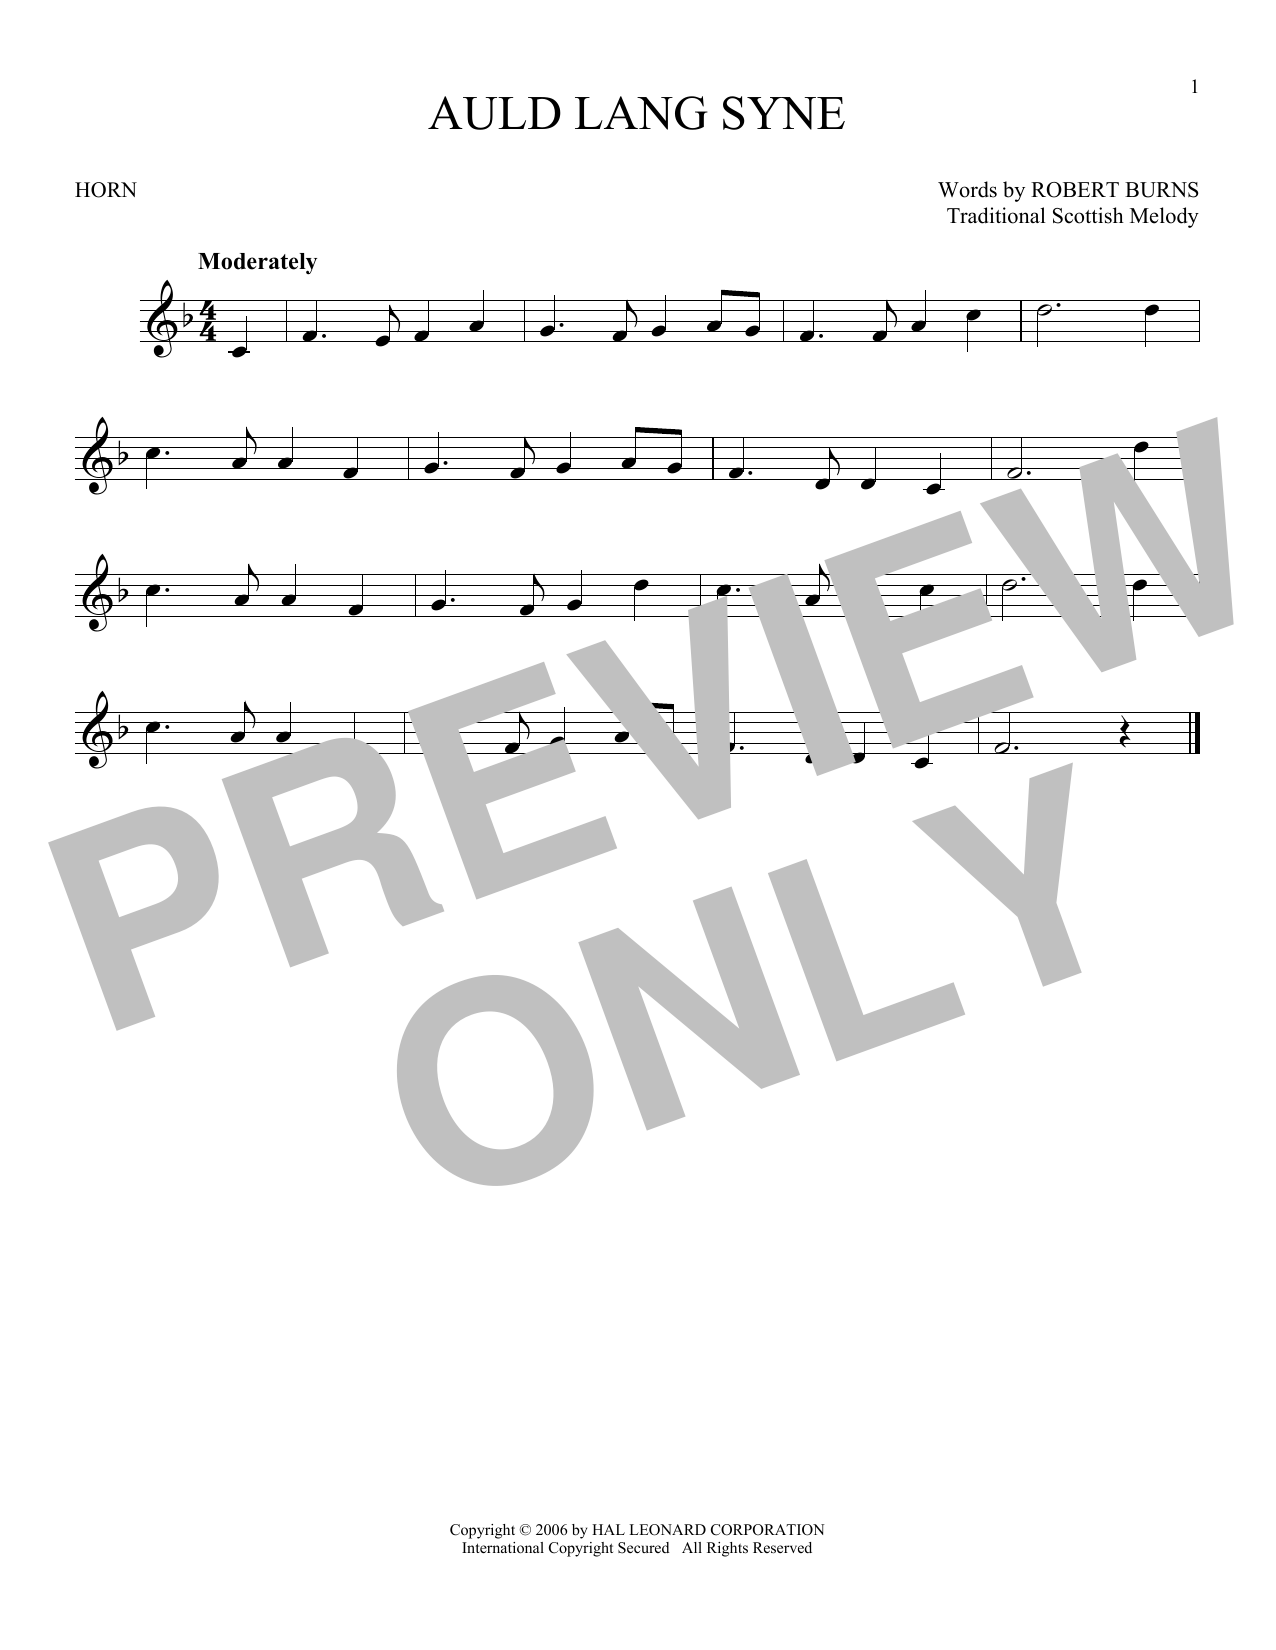 Download Traditional Scottish Melody Auld Lang Syne Sheet Music